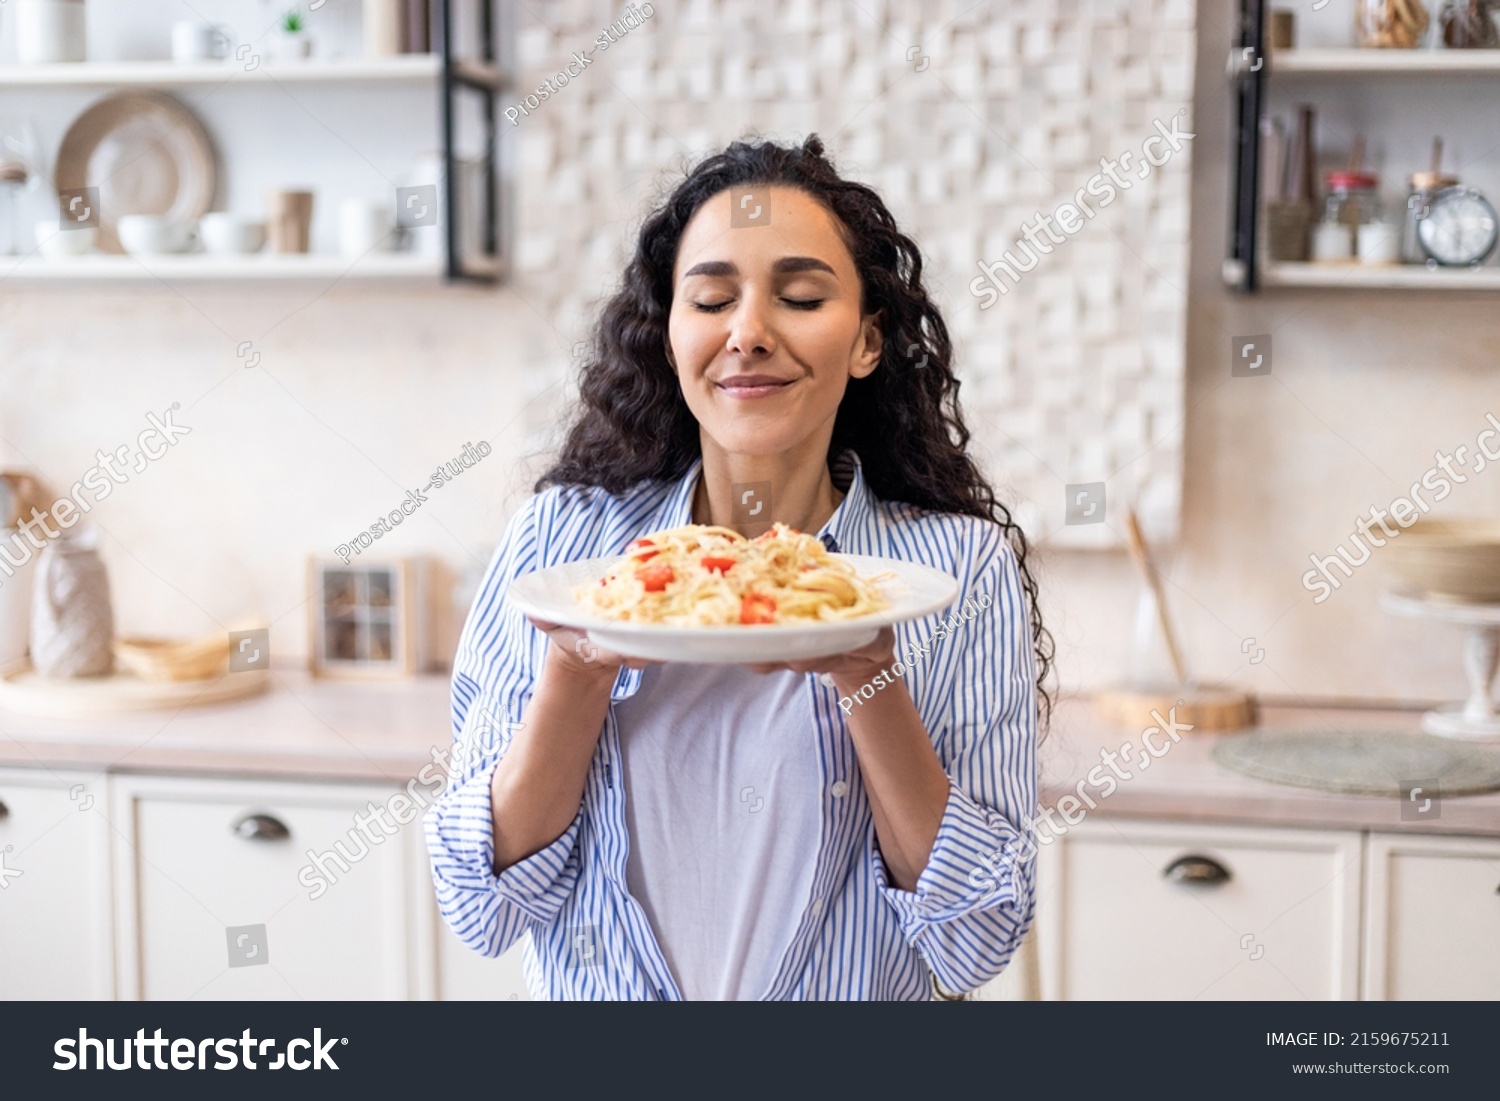 Happy lady tasting homemade spaghetti while having lunch, enjoying the smell with eyes closed, sitting in kitchen interior. Woman cooking and eating tasty food at home #2159675211